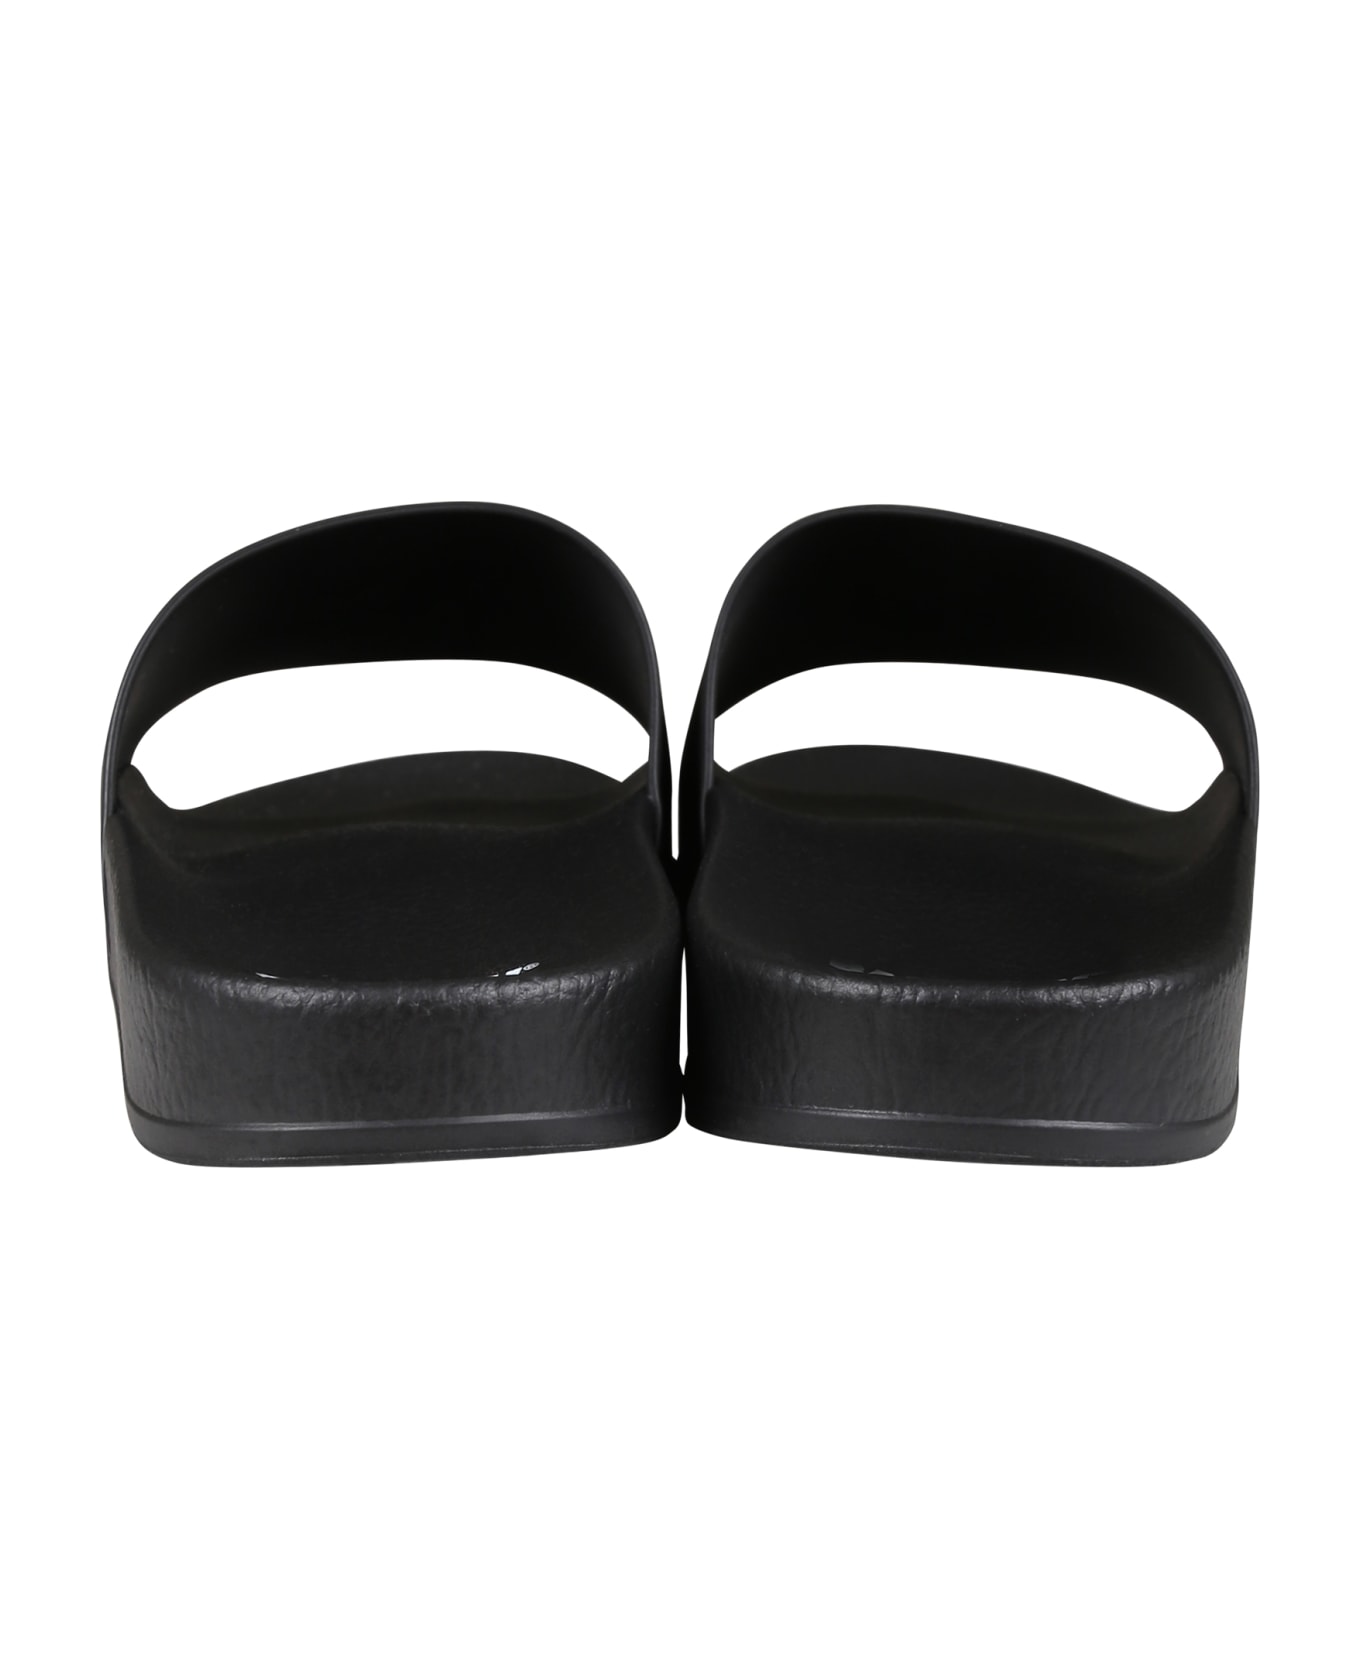 Barrow Black Slippers For Boy With Smiley - Black